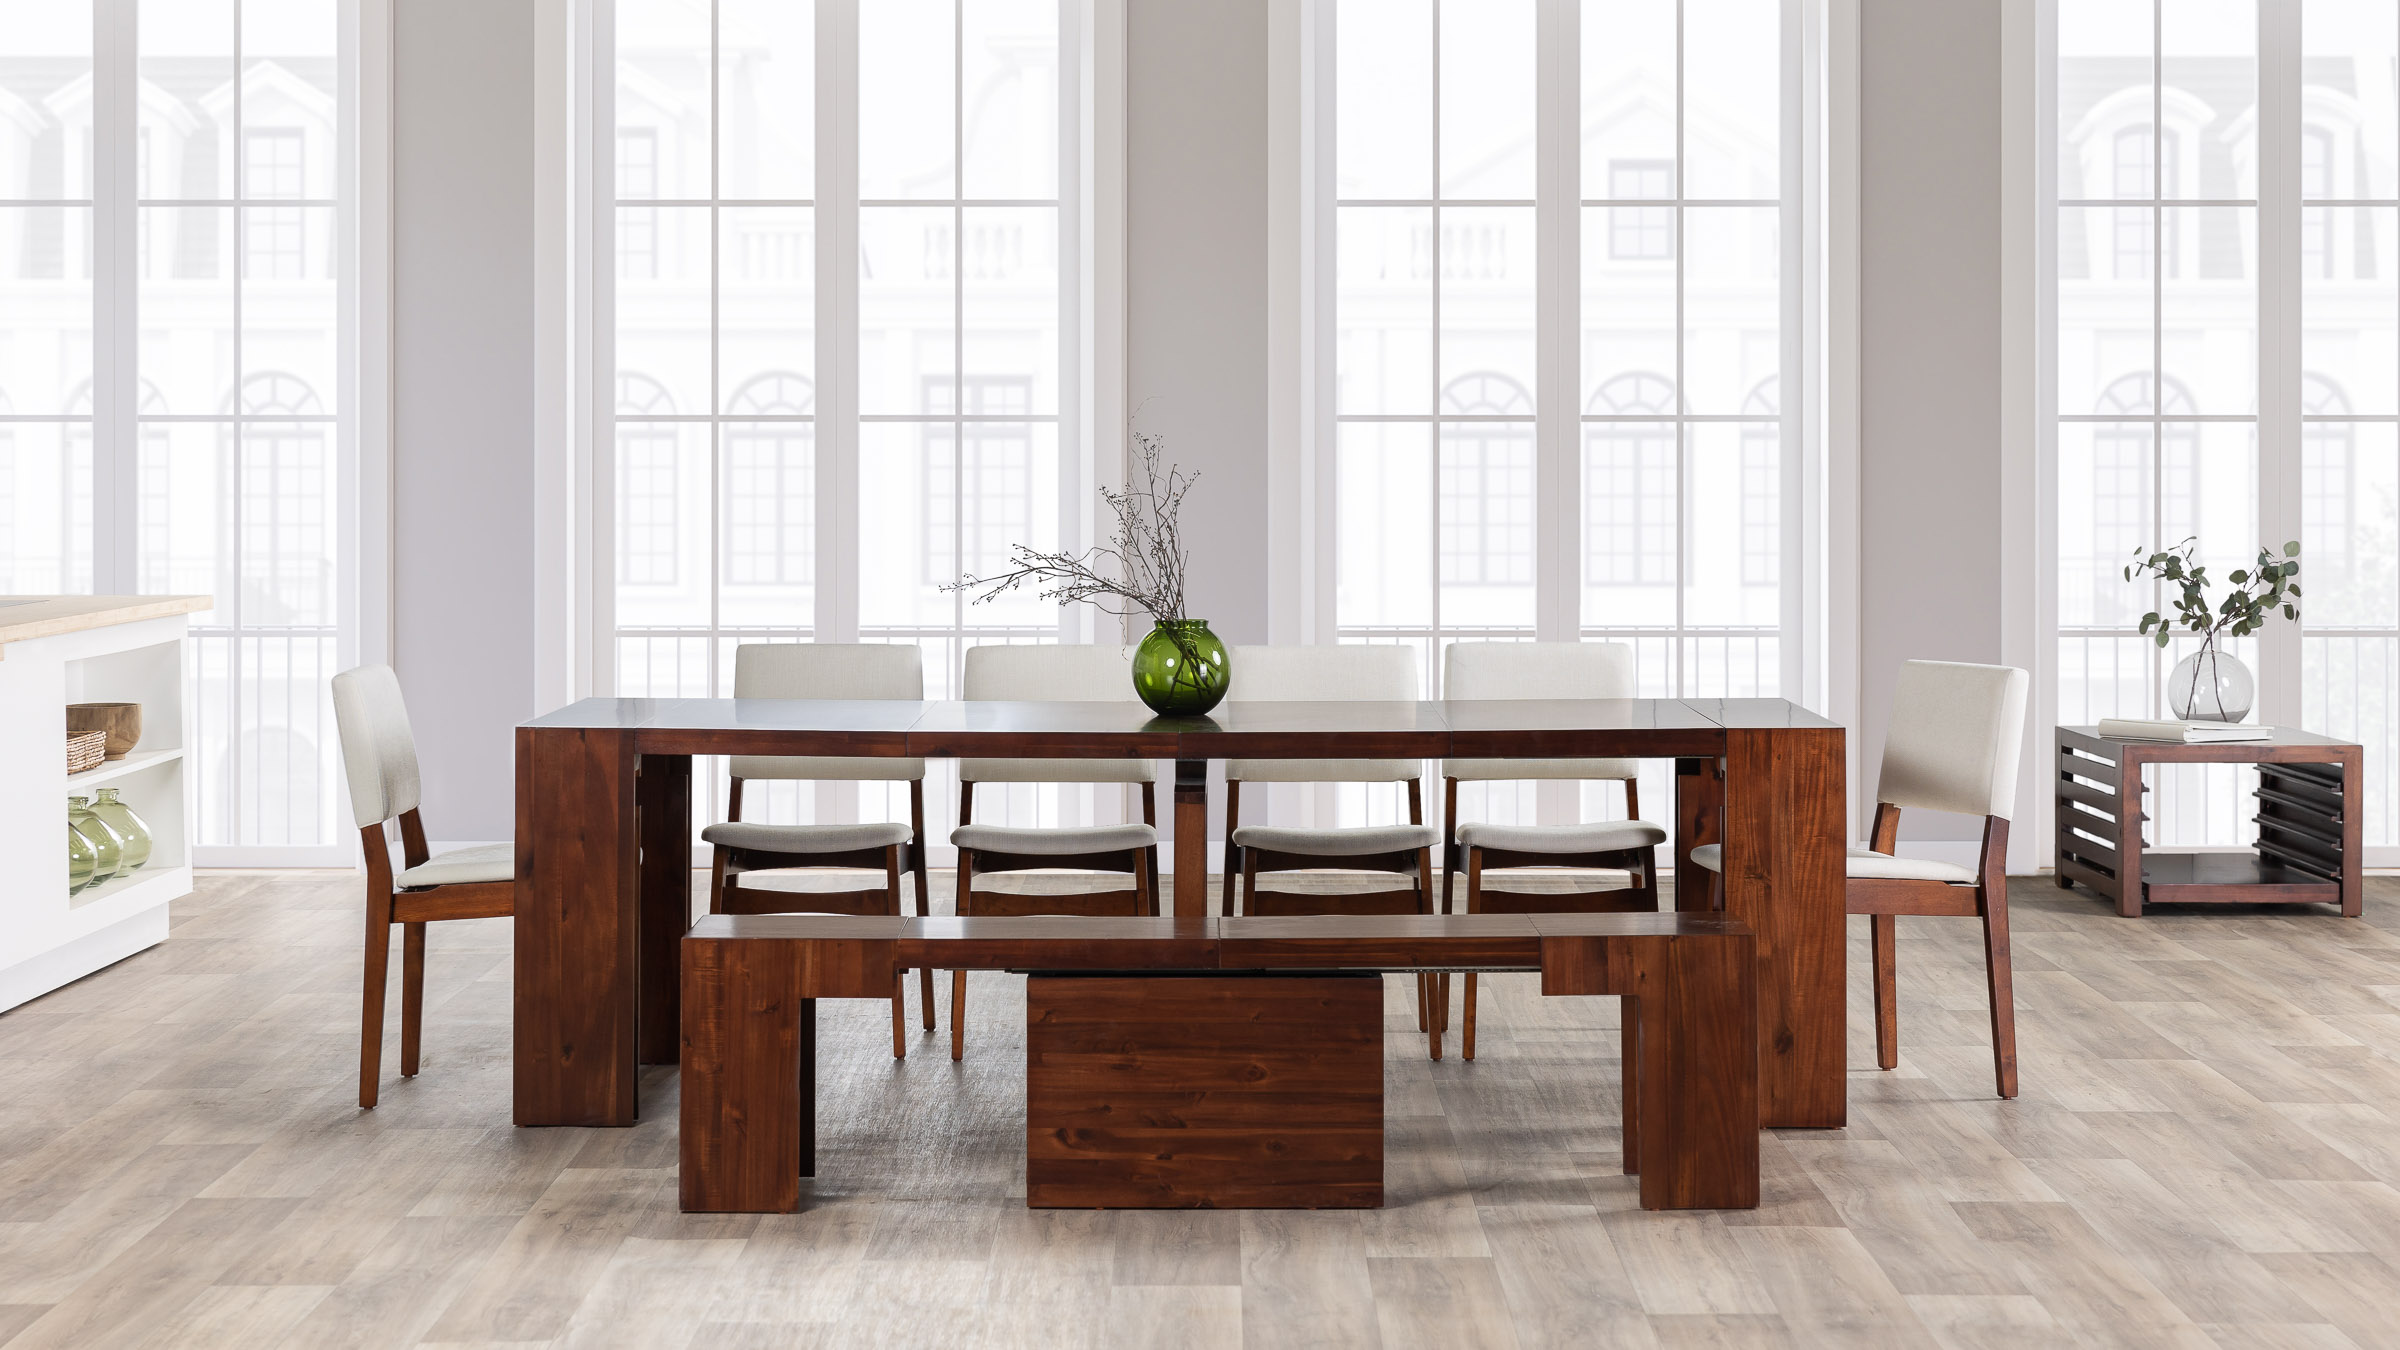 A fully extended adjustable dining table.